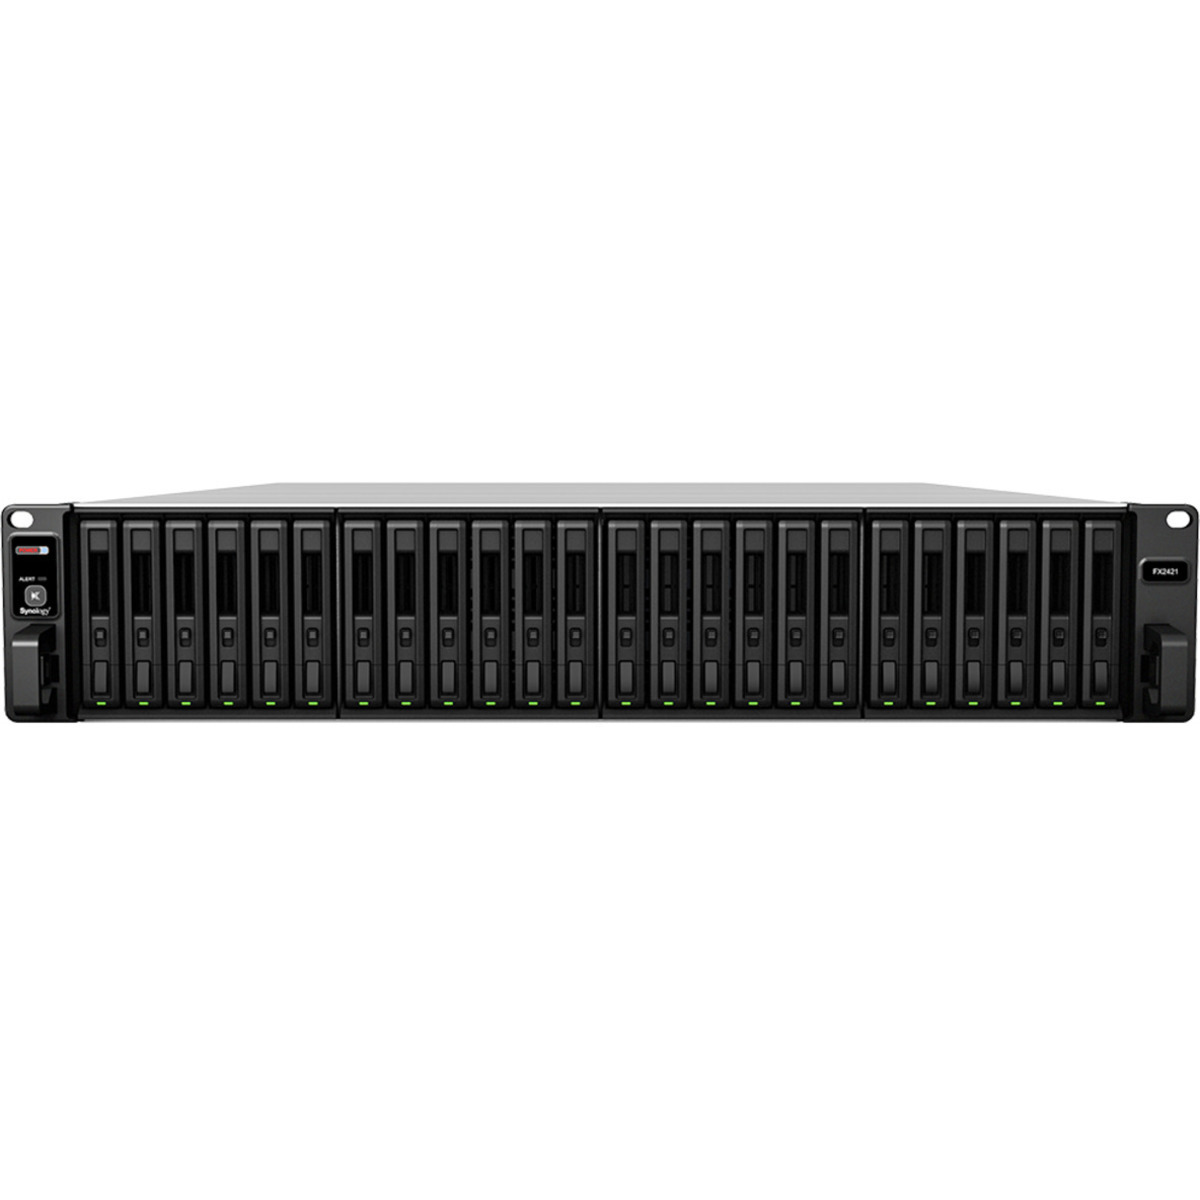 buy Synology FX2421 RackMount Expansion Enclosure Burn-In Tested Configurations - nas headquarters buy network attached storage server device das new raid-5 free shipping usa christmas new year holiday sale FX2421